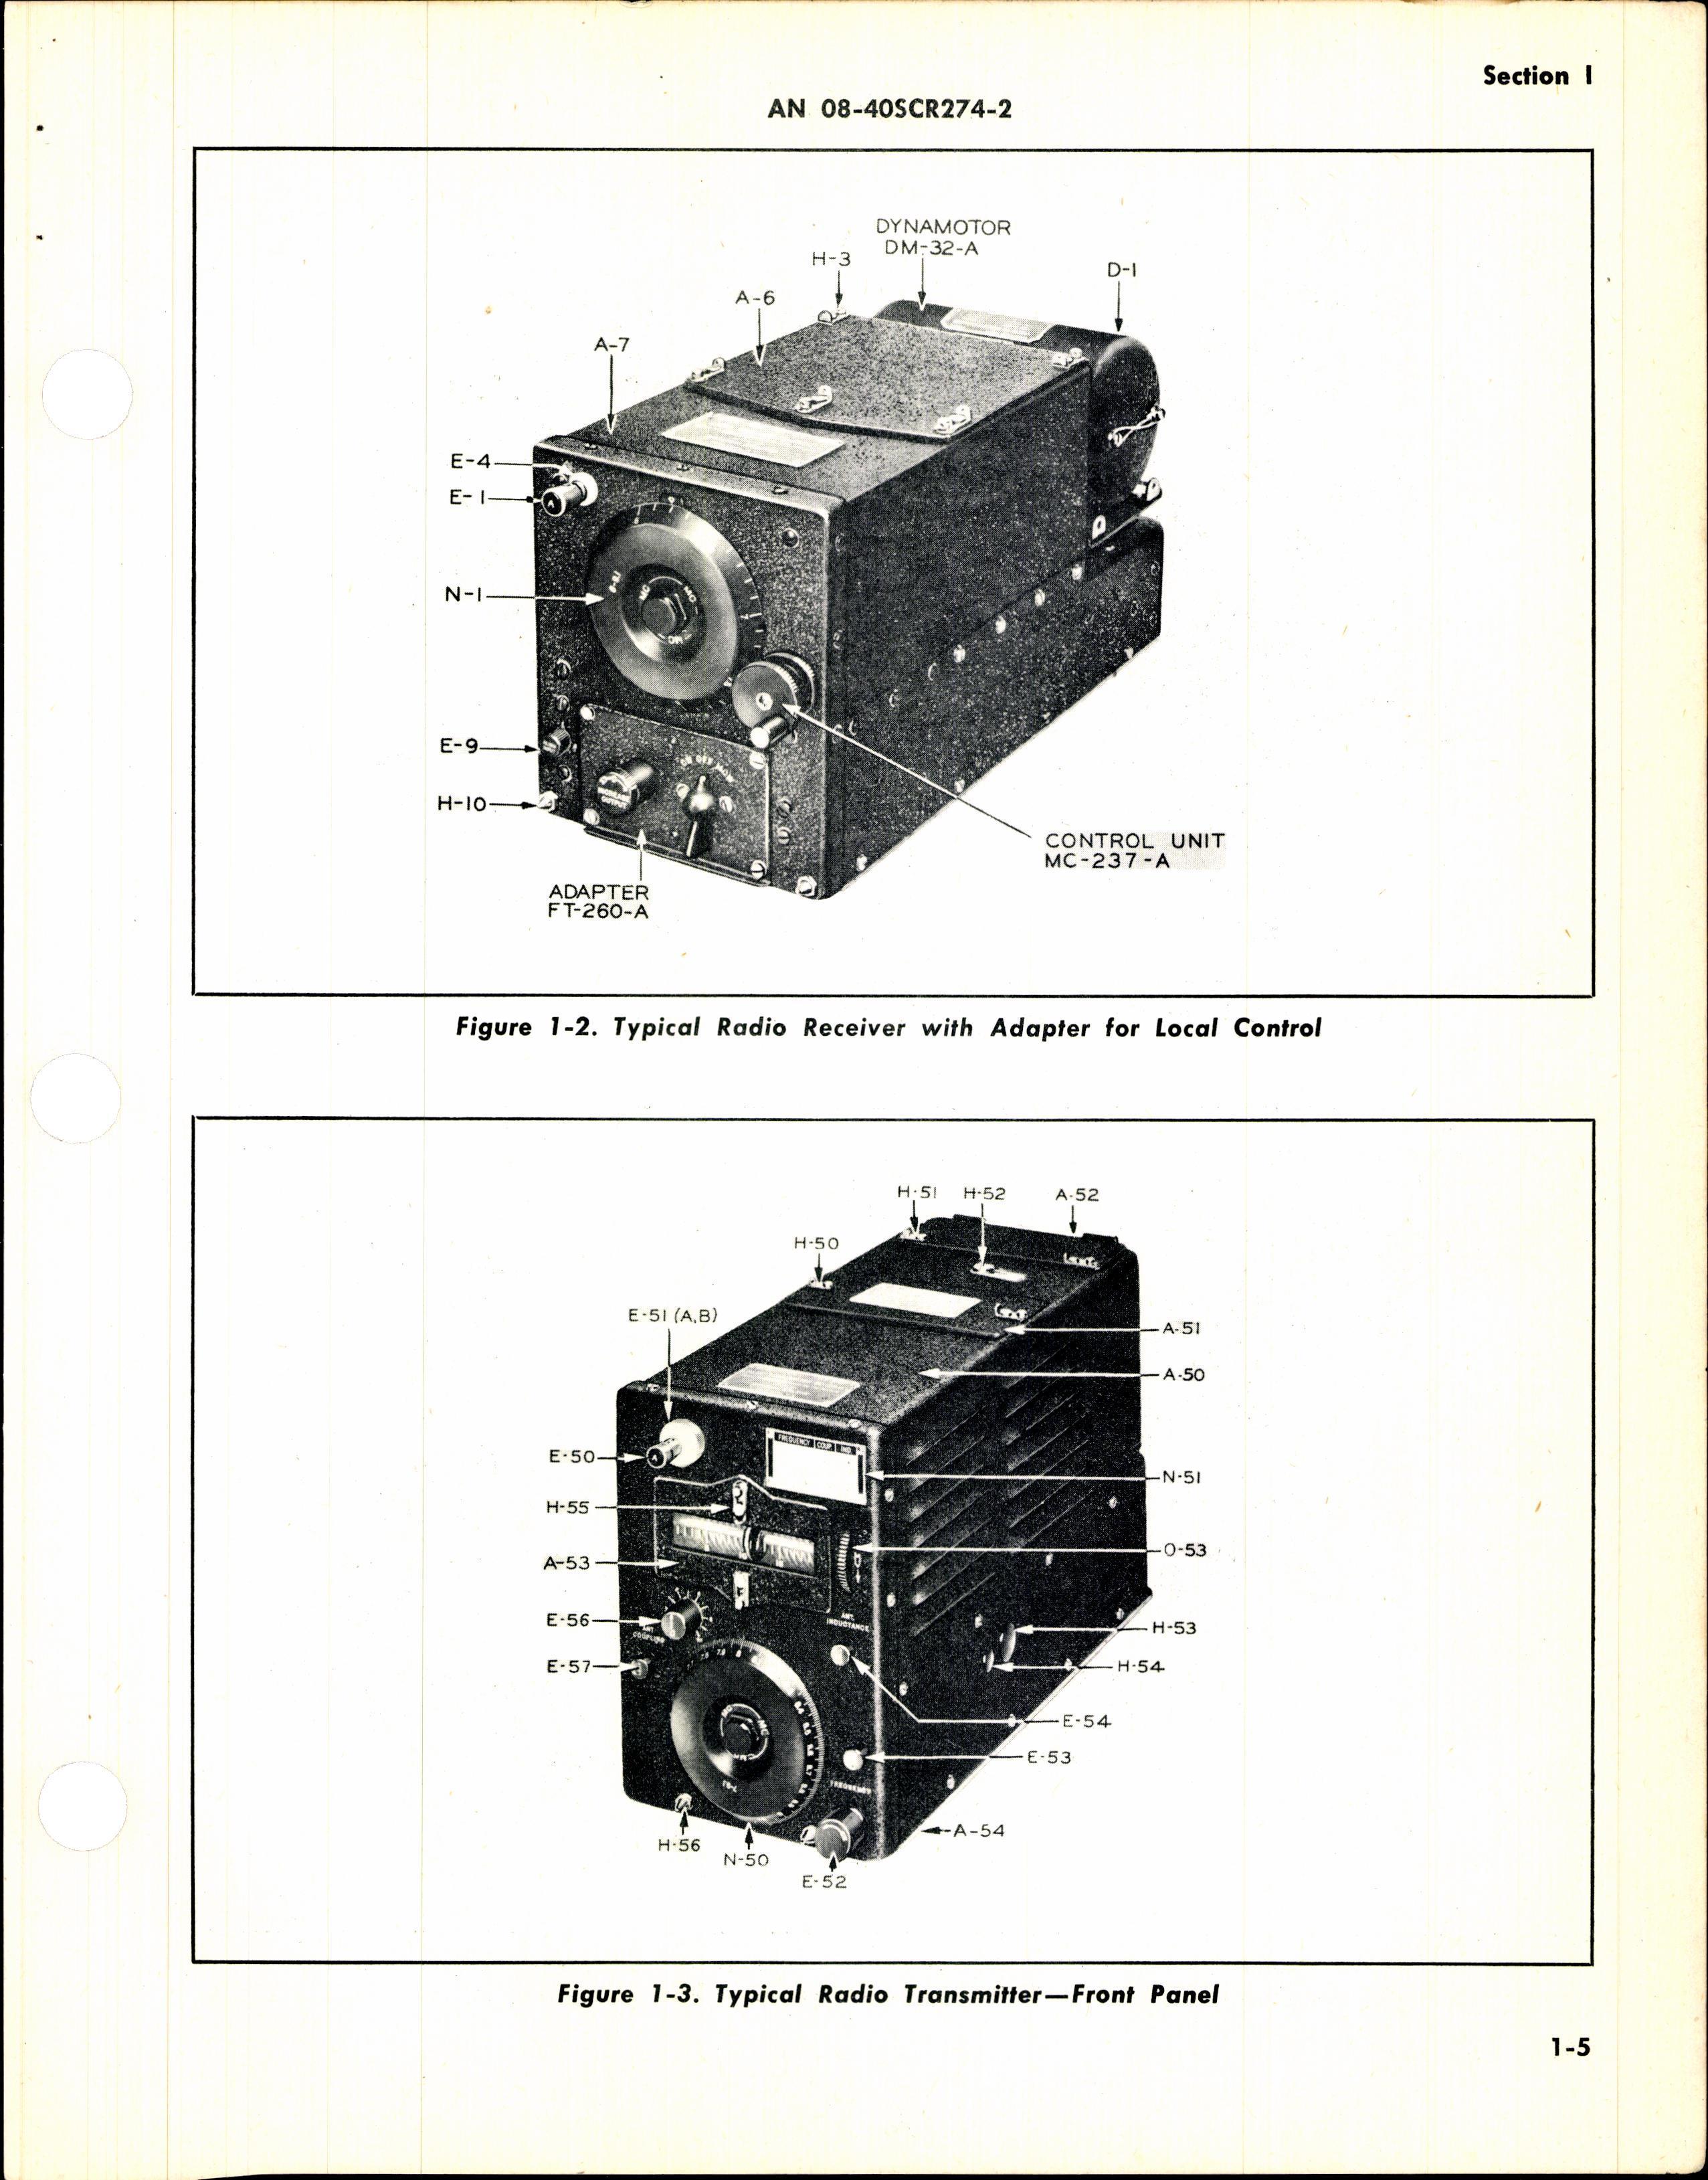 Sample page 11 from AirCorps Library document: Handbook Operating Instructions for Radio Set SCR-274-N